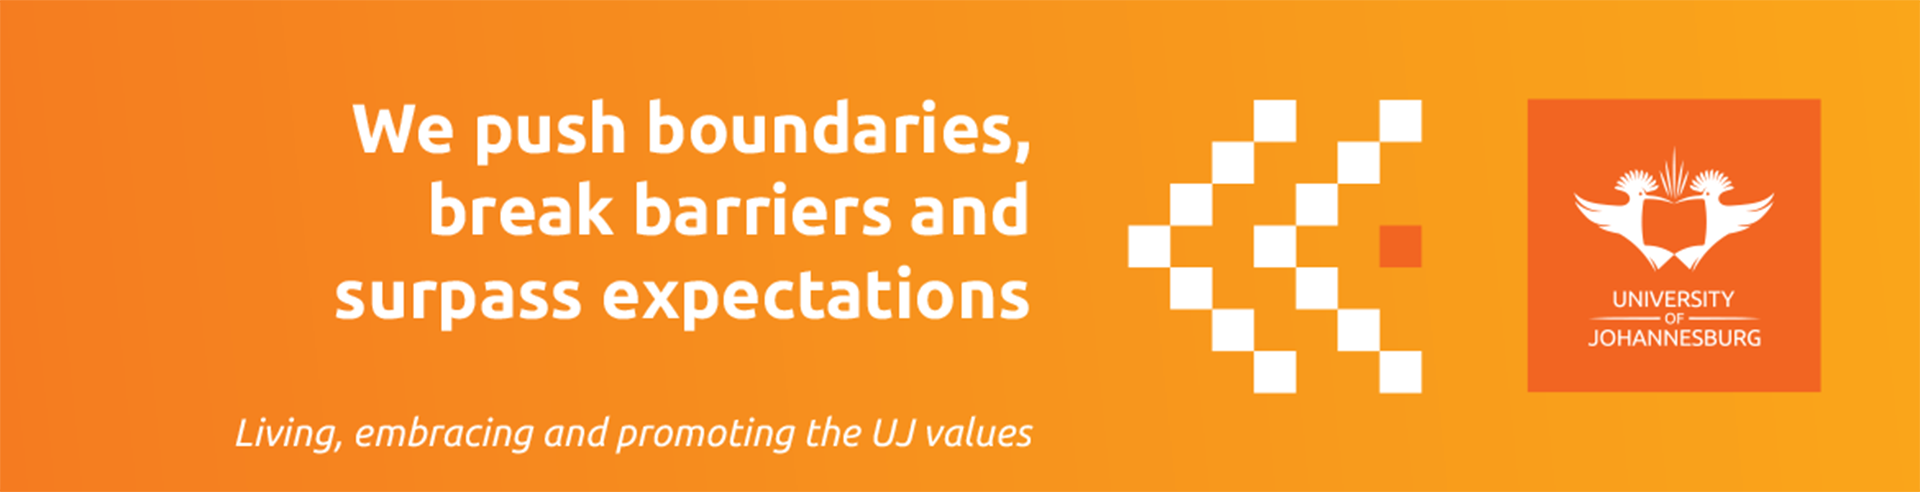 Uj Values Expressions Posters 2020 Ulink 1170x300mm 15